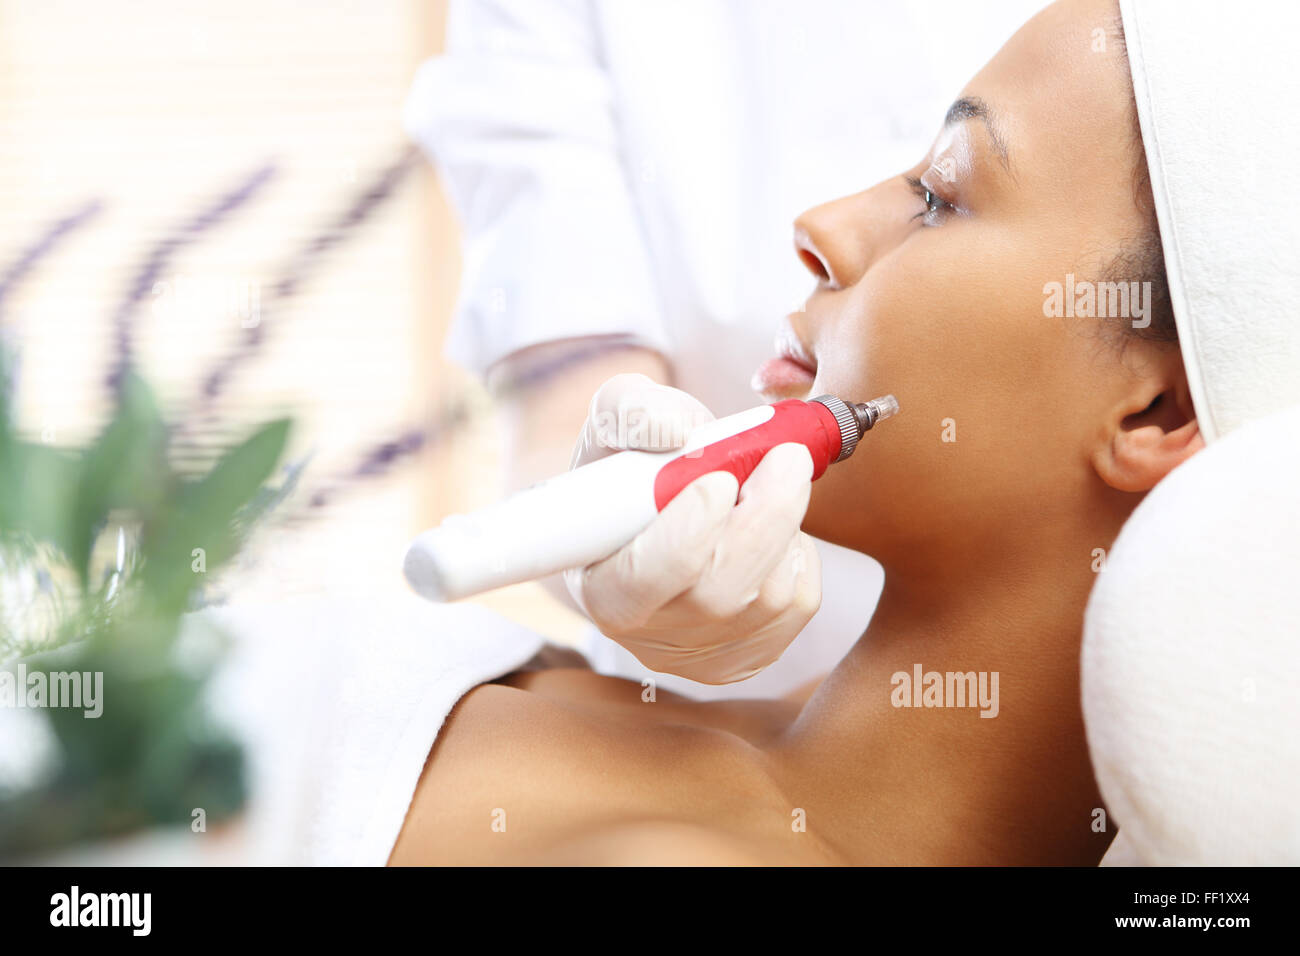 The woman's face during a facial at a beauty salon. Stock Photo